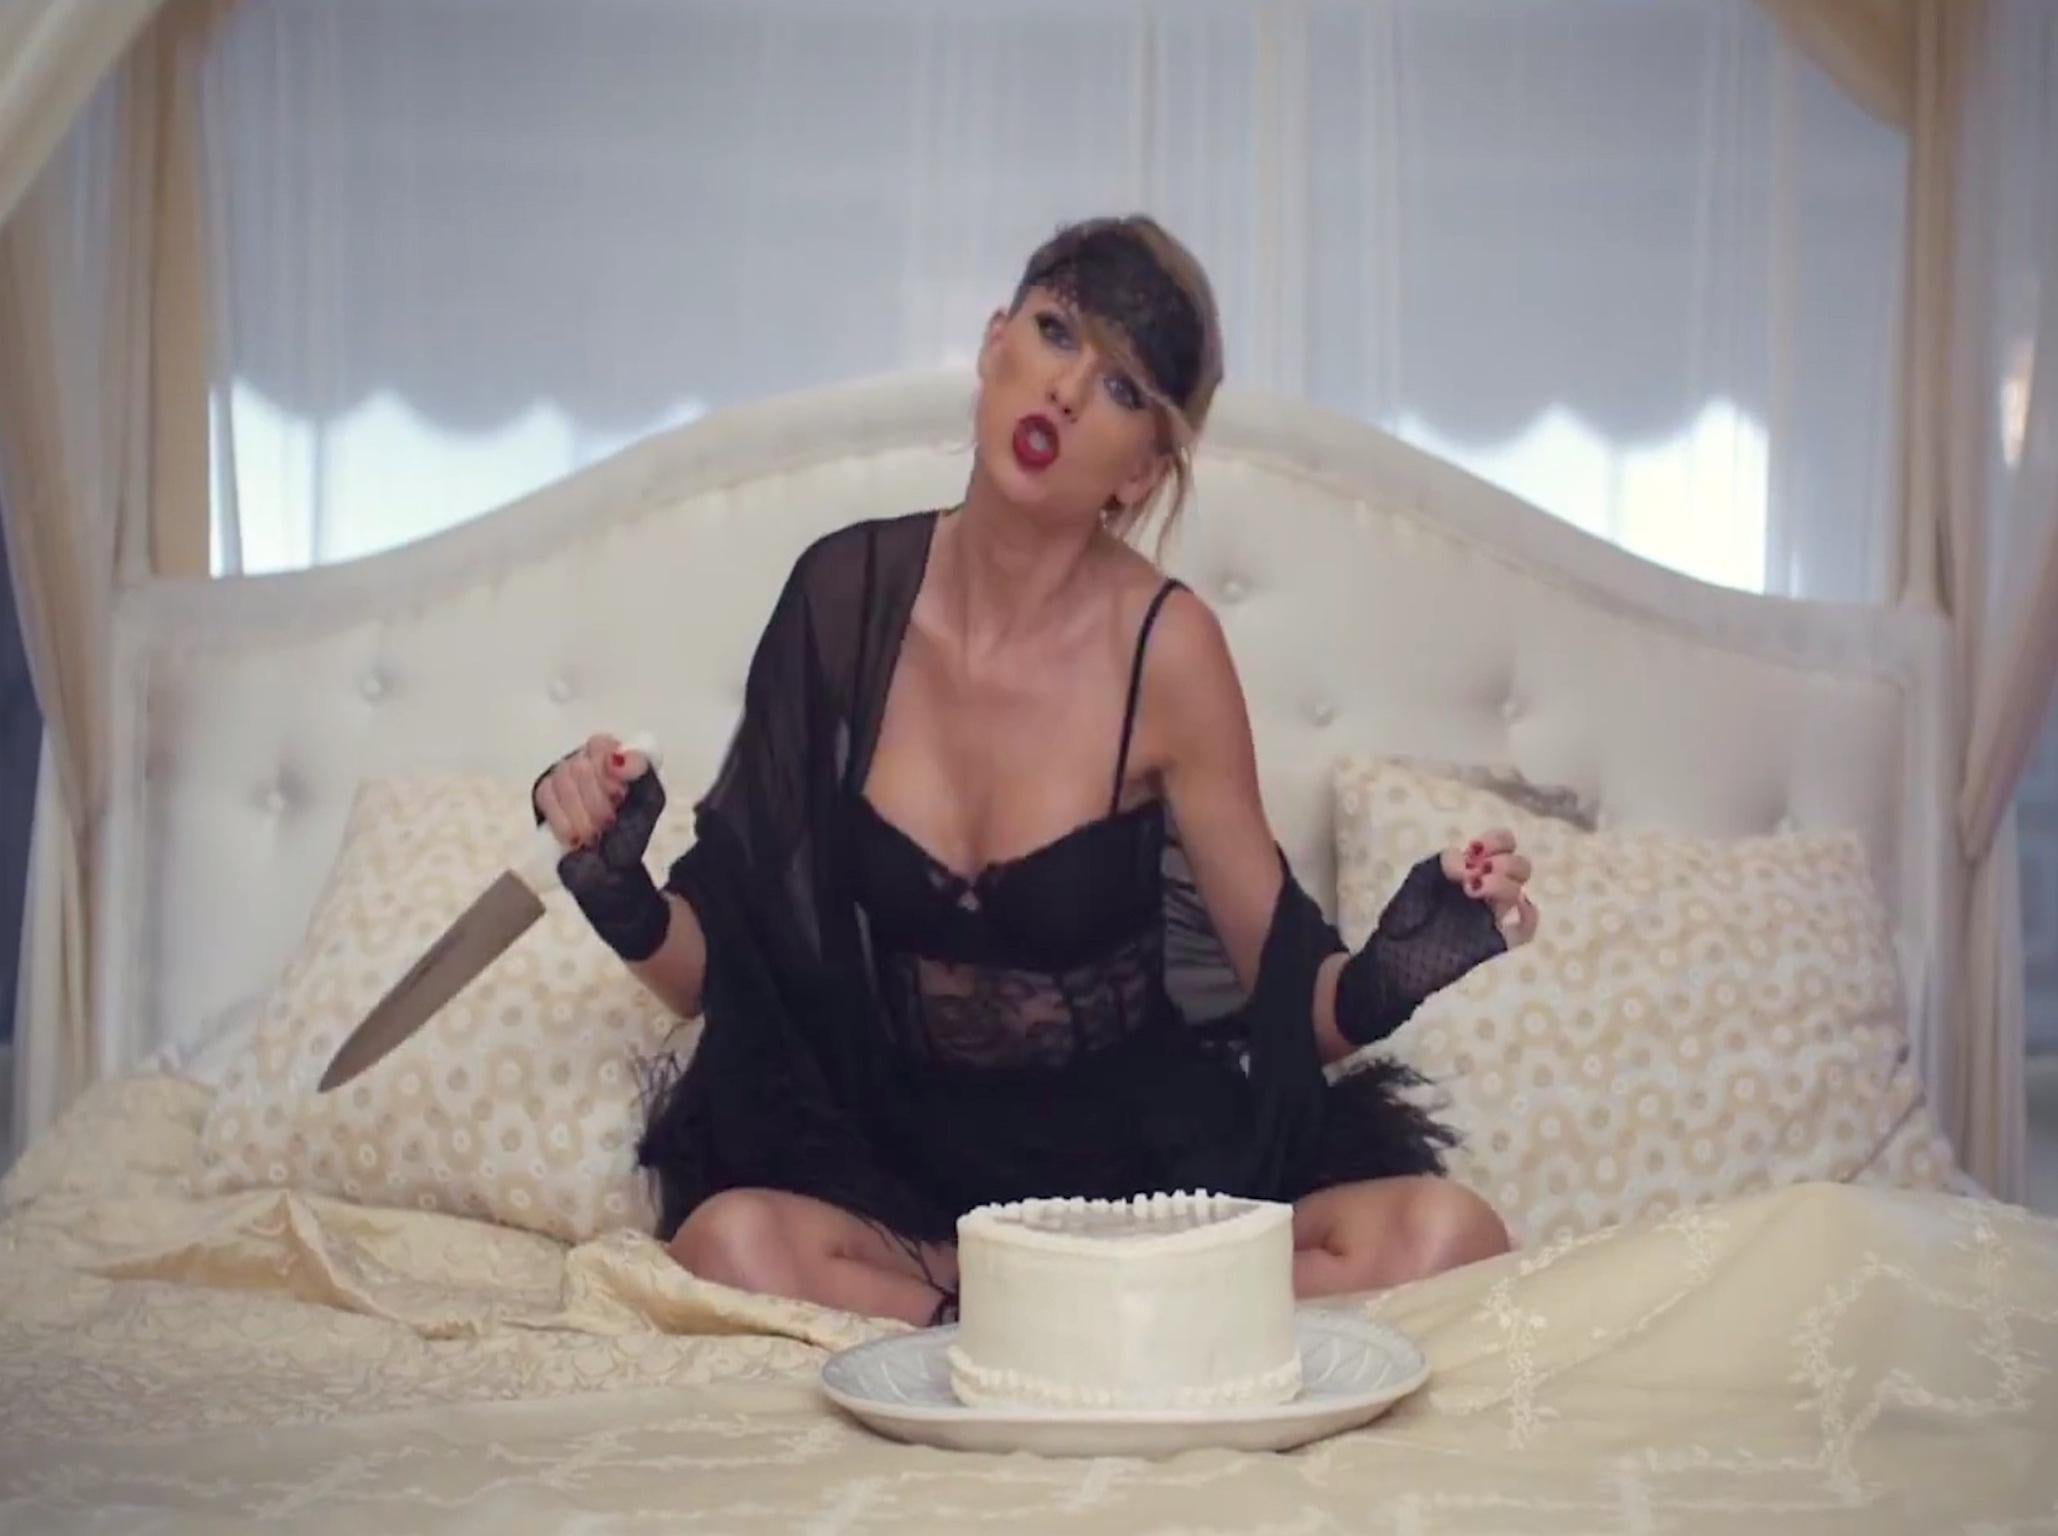 Taylor Swift recorded a video for Blank Space at the property last year